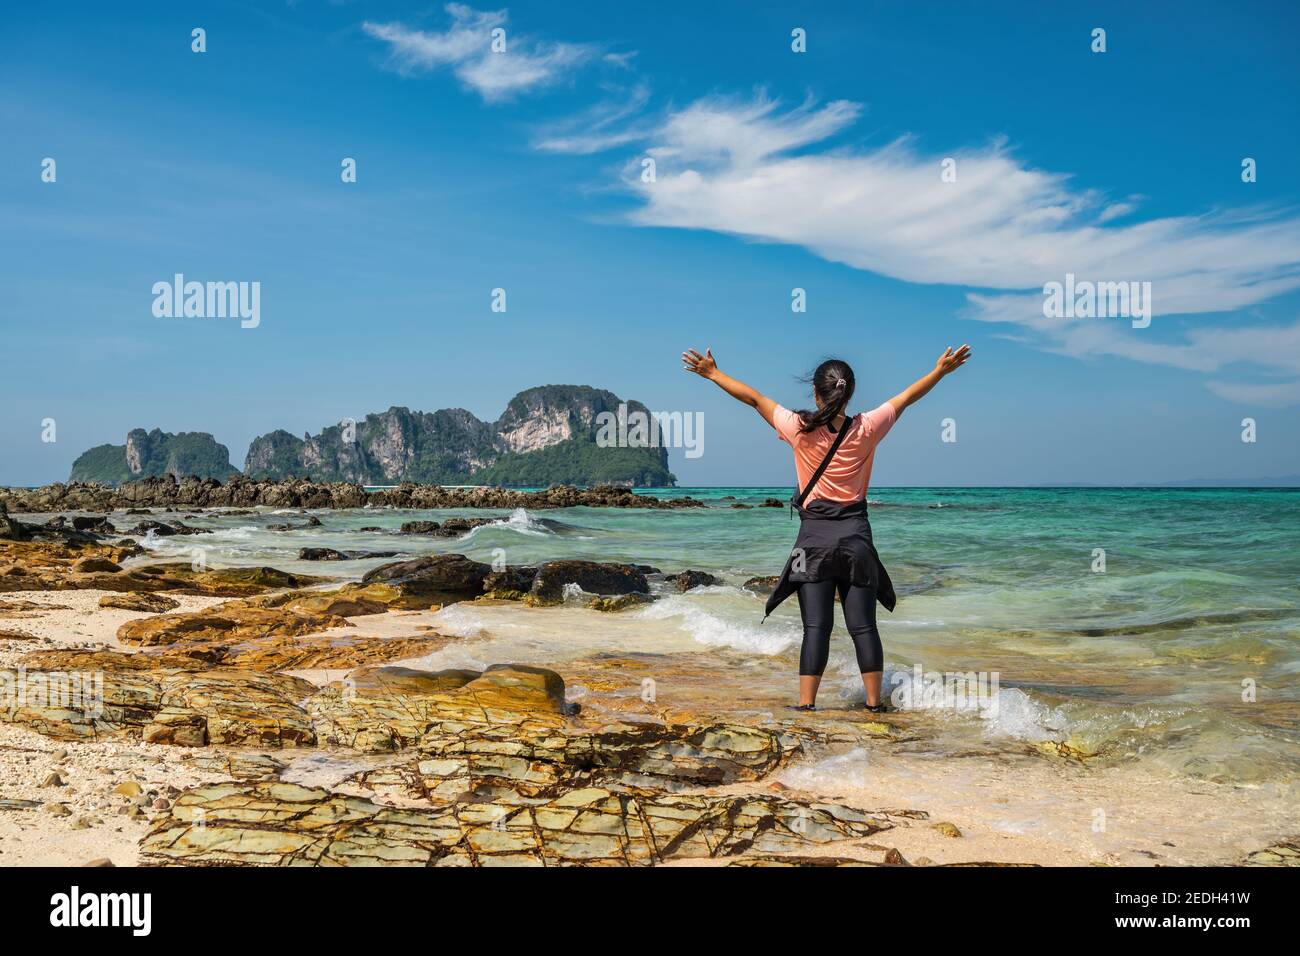 Tropical islands view with woman tourist looking at ocean blue sea water and white sand beach at Bamboo Island, Krabi Thailand nature landscape Stock Photo